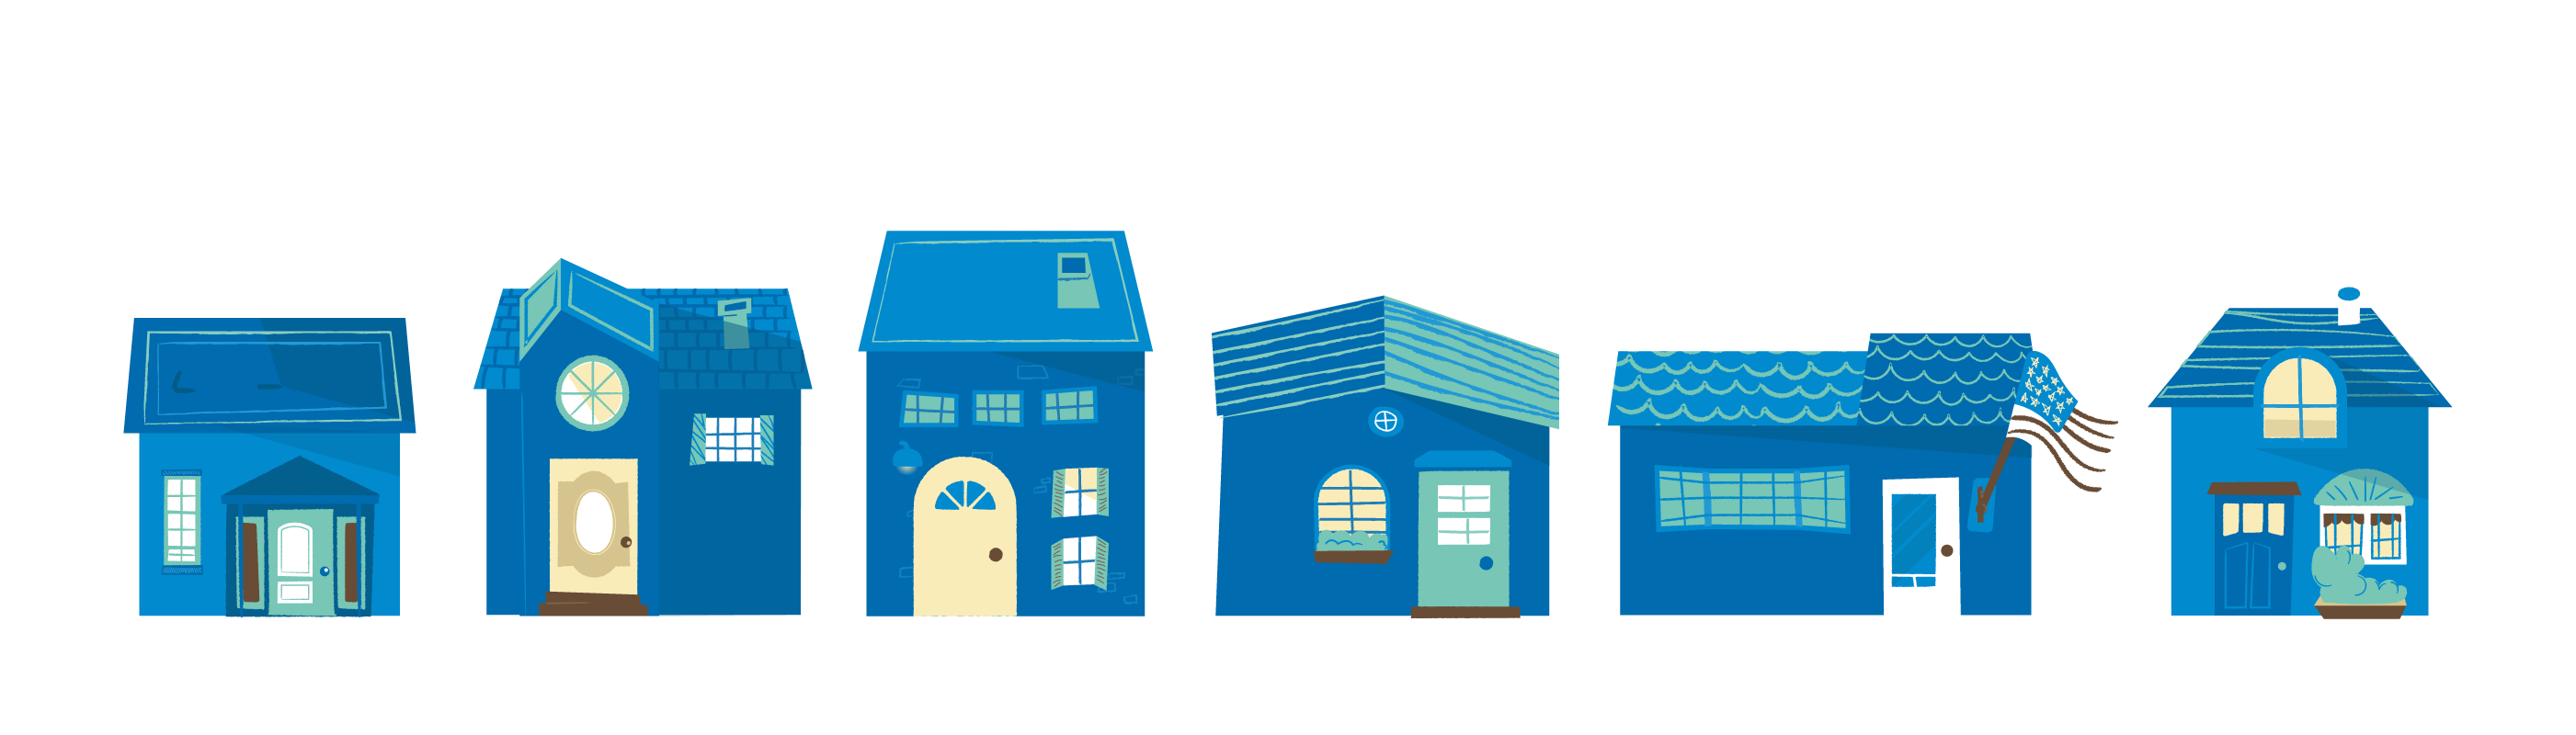 An illustration of a row of six different, but blue, houses, viewed from the front